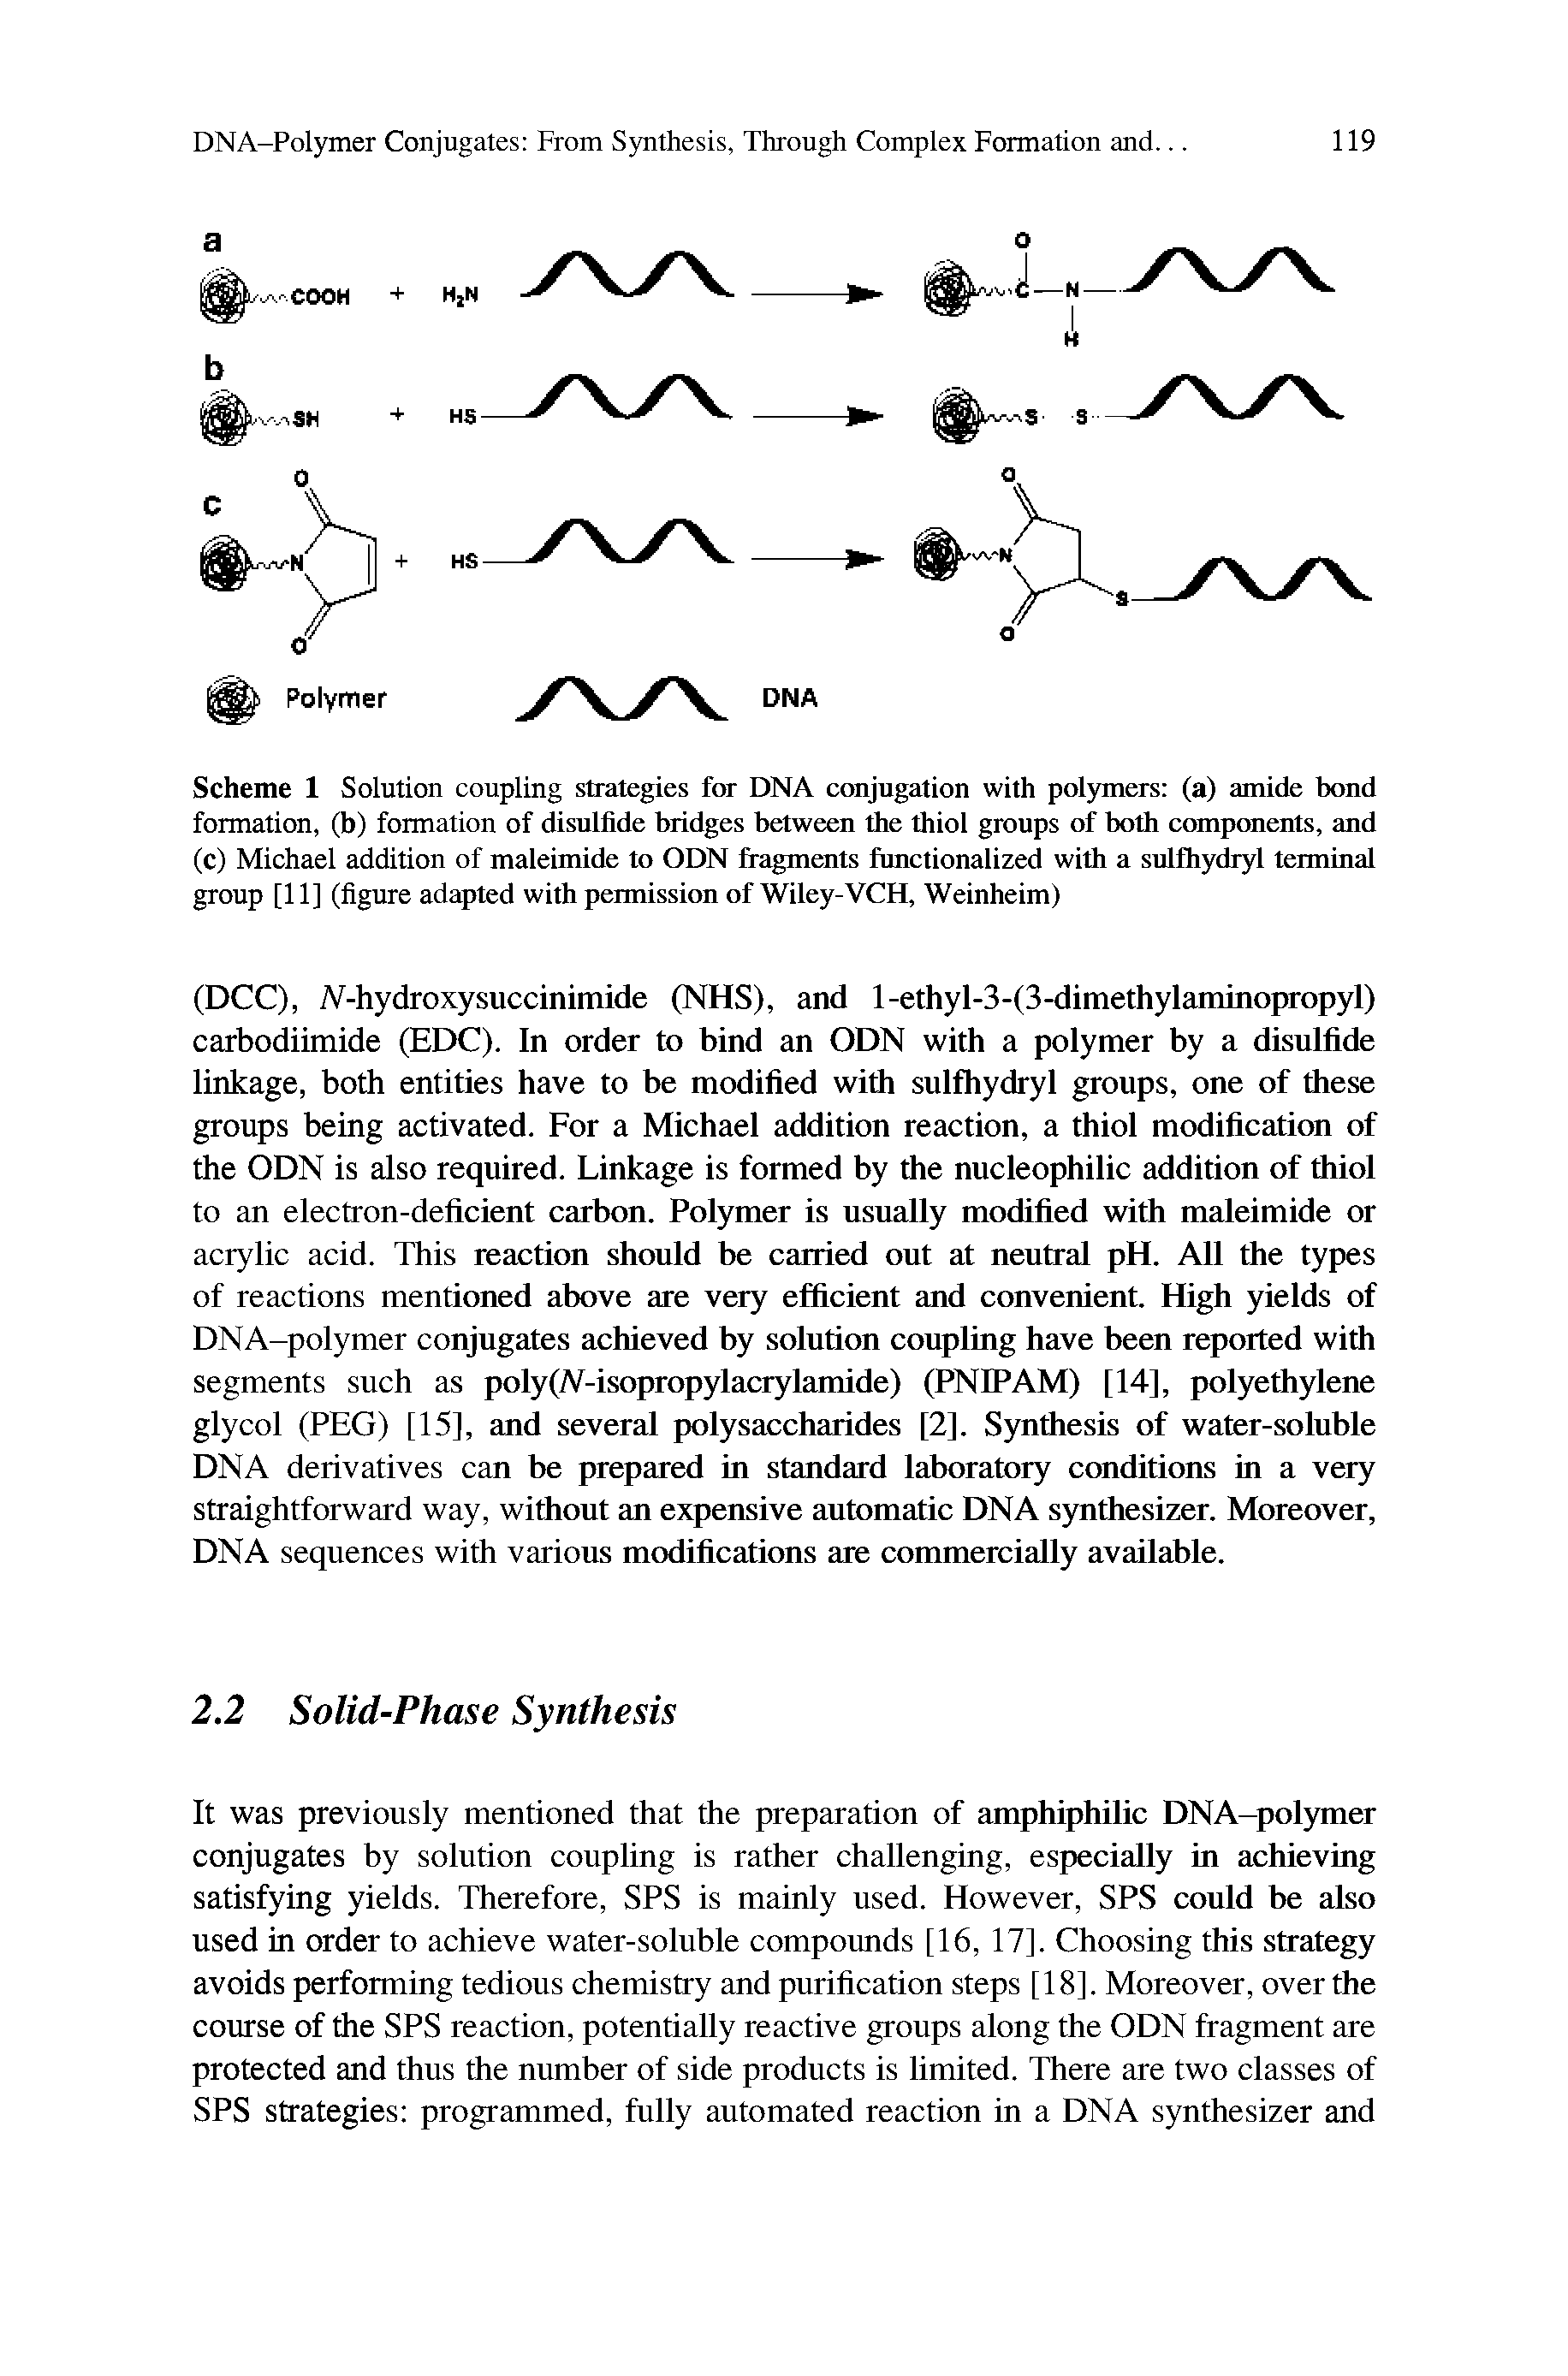 Scheme 1 Solution coupling strategies for DNA conjugation with polymers (a) amide bond formation, (b) formation of disulfide bridges between the thiol groups of both eranponents, and (c) Michael addition of maleimide to ODN fragments functionalized with a snlfhydryl terminal group [11] (figure adapted with permission of Wiley-VCH, Weinheim)...